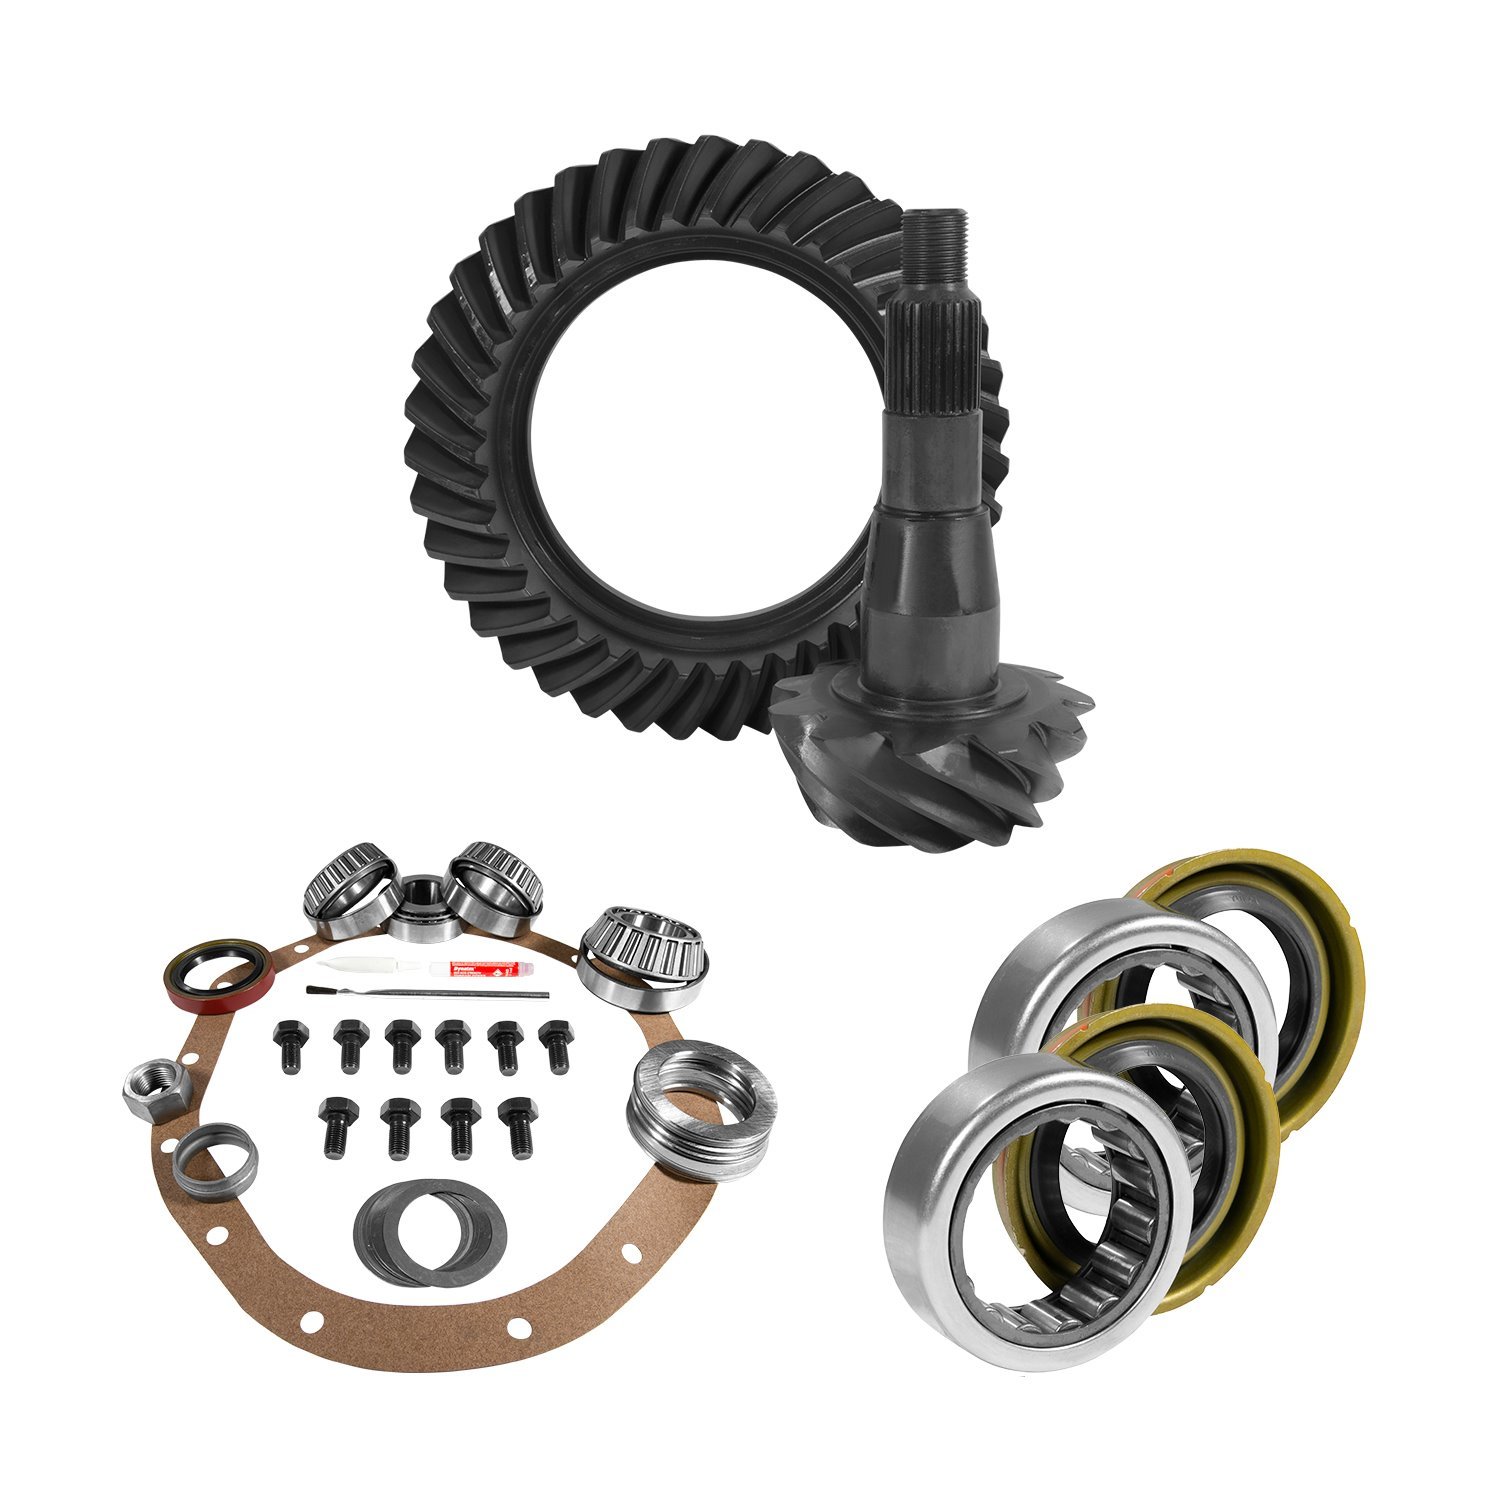 USA Standard 10788 9.25 in. Chy 3.55 Rear Ring & Pinion Install Kit, 1.705 in. Axle Bearings & Seal